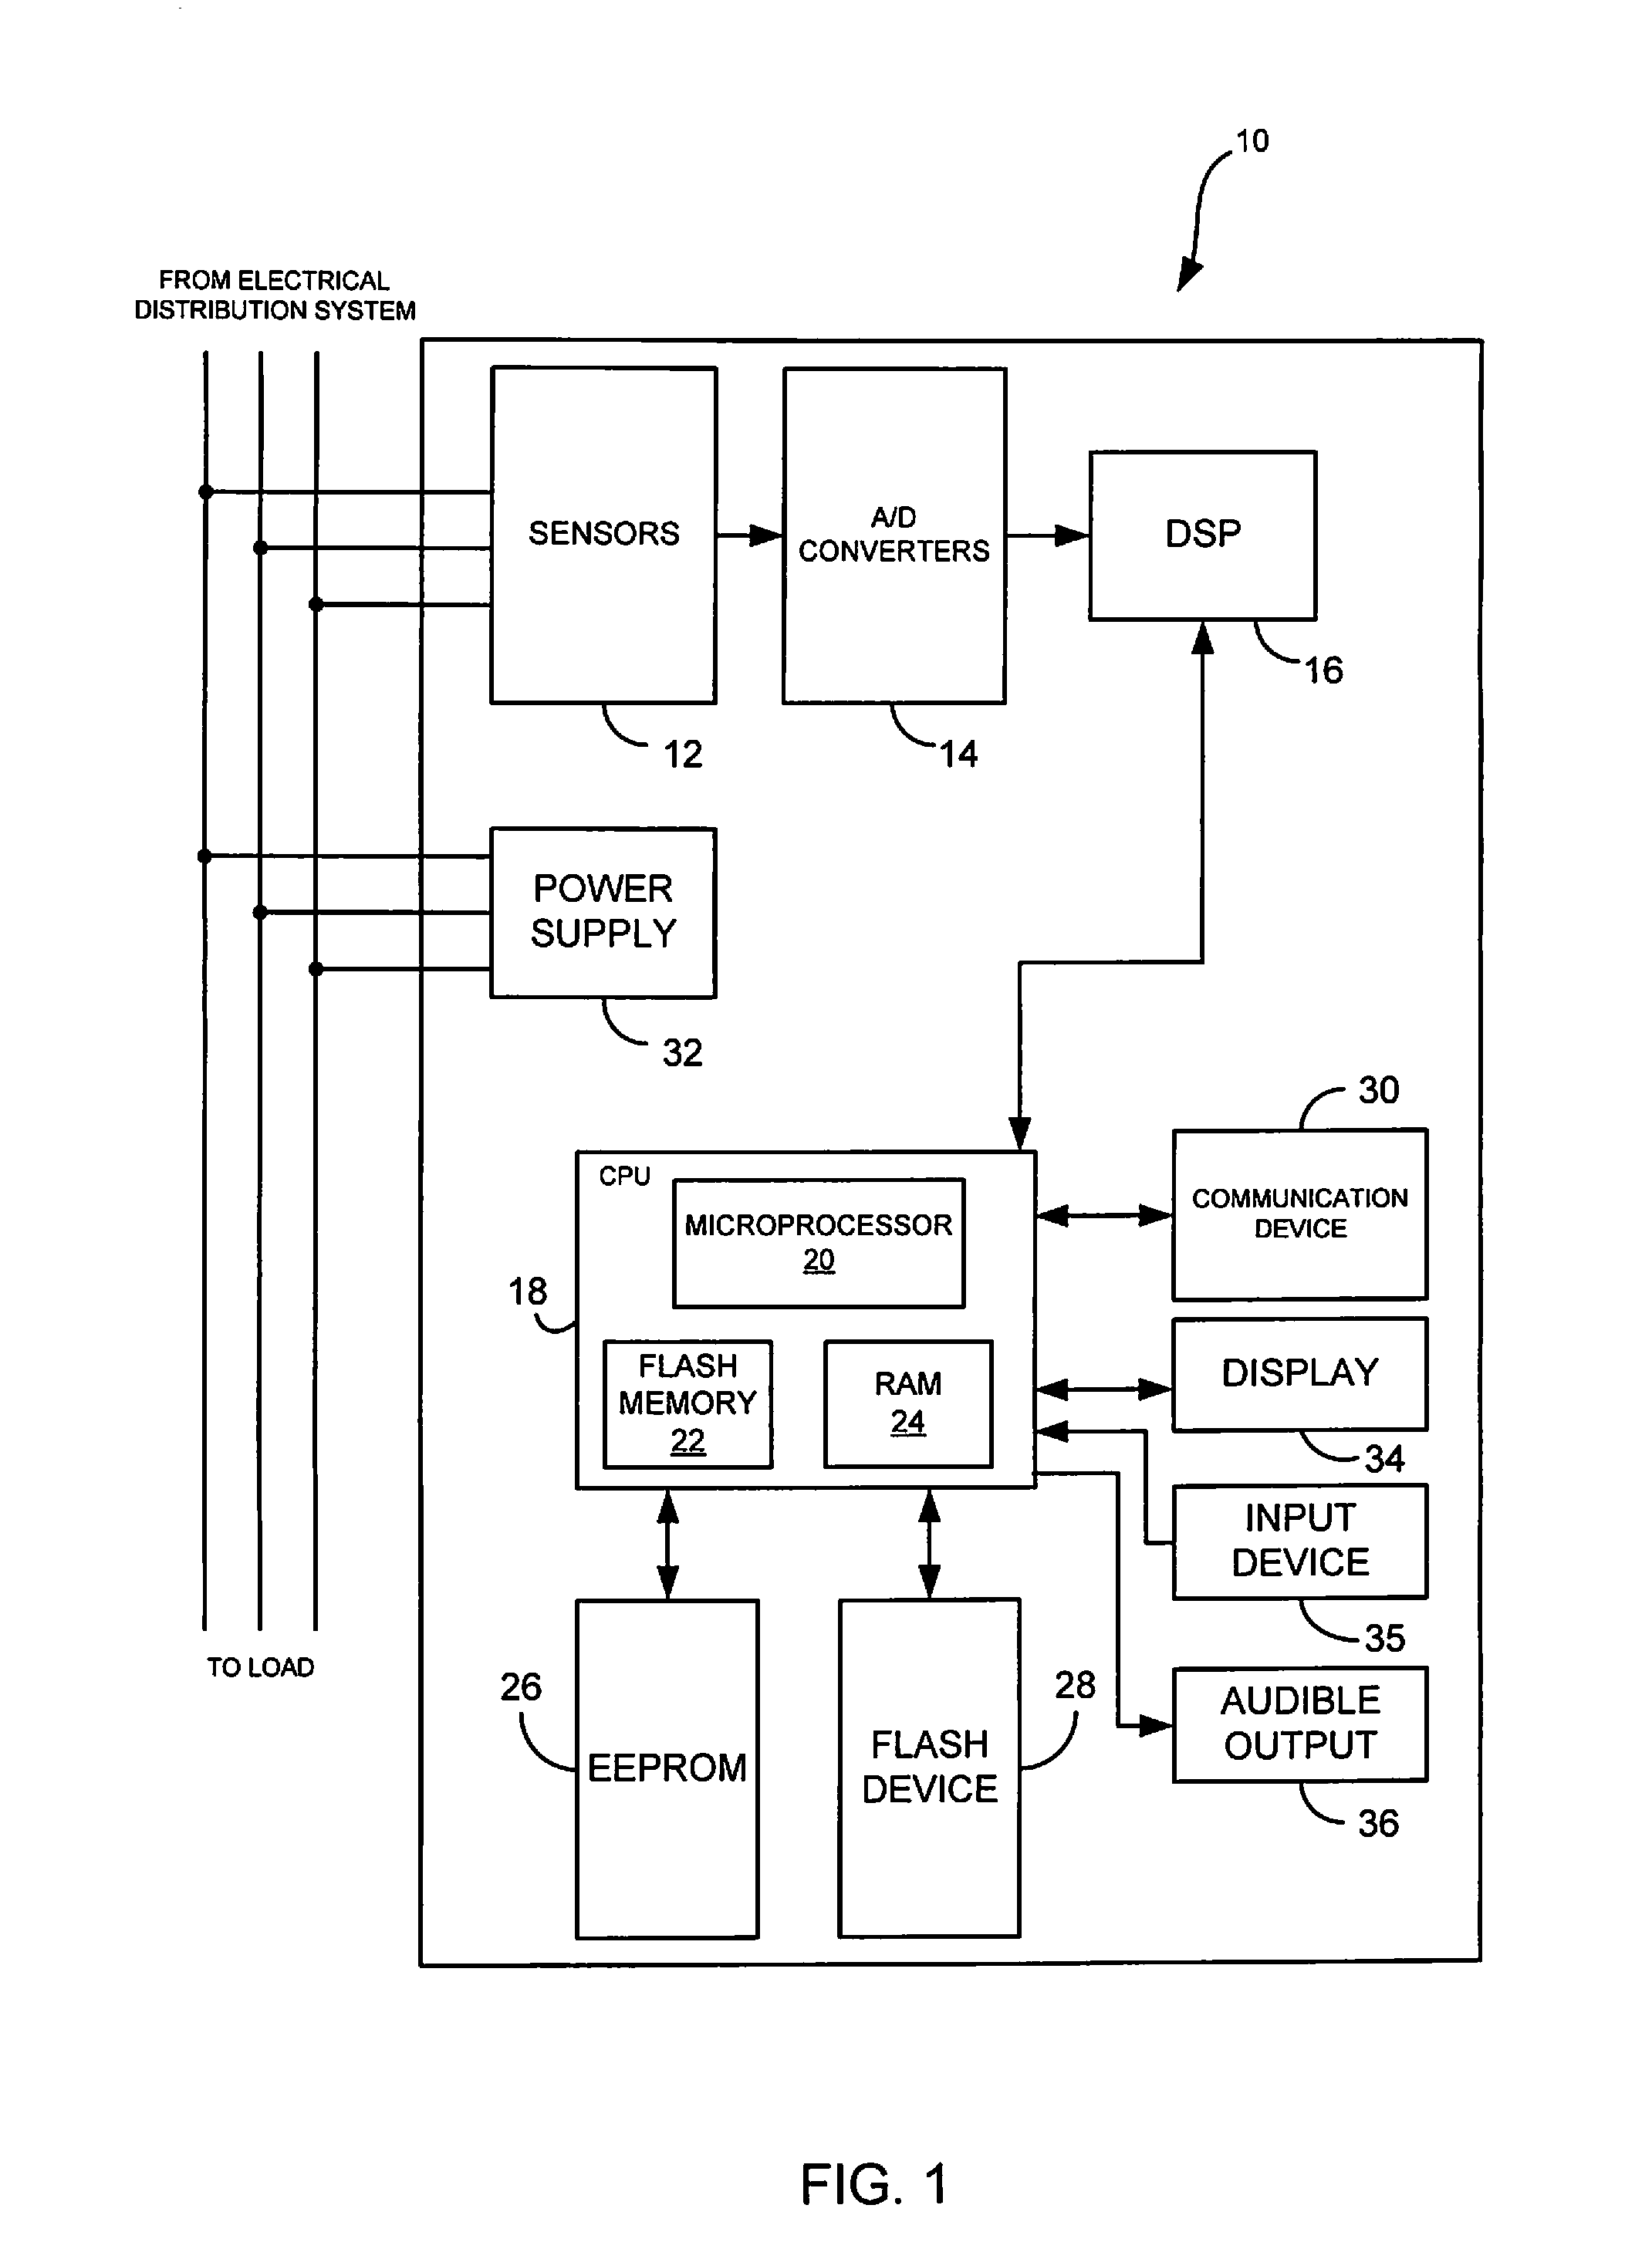 Intelligent electronic device capable of operating as a USB master device and a USB slave device